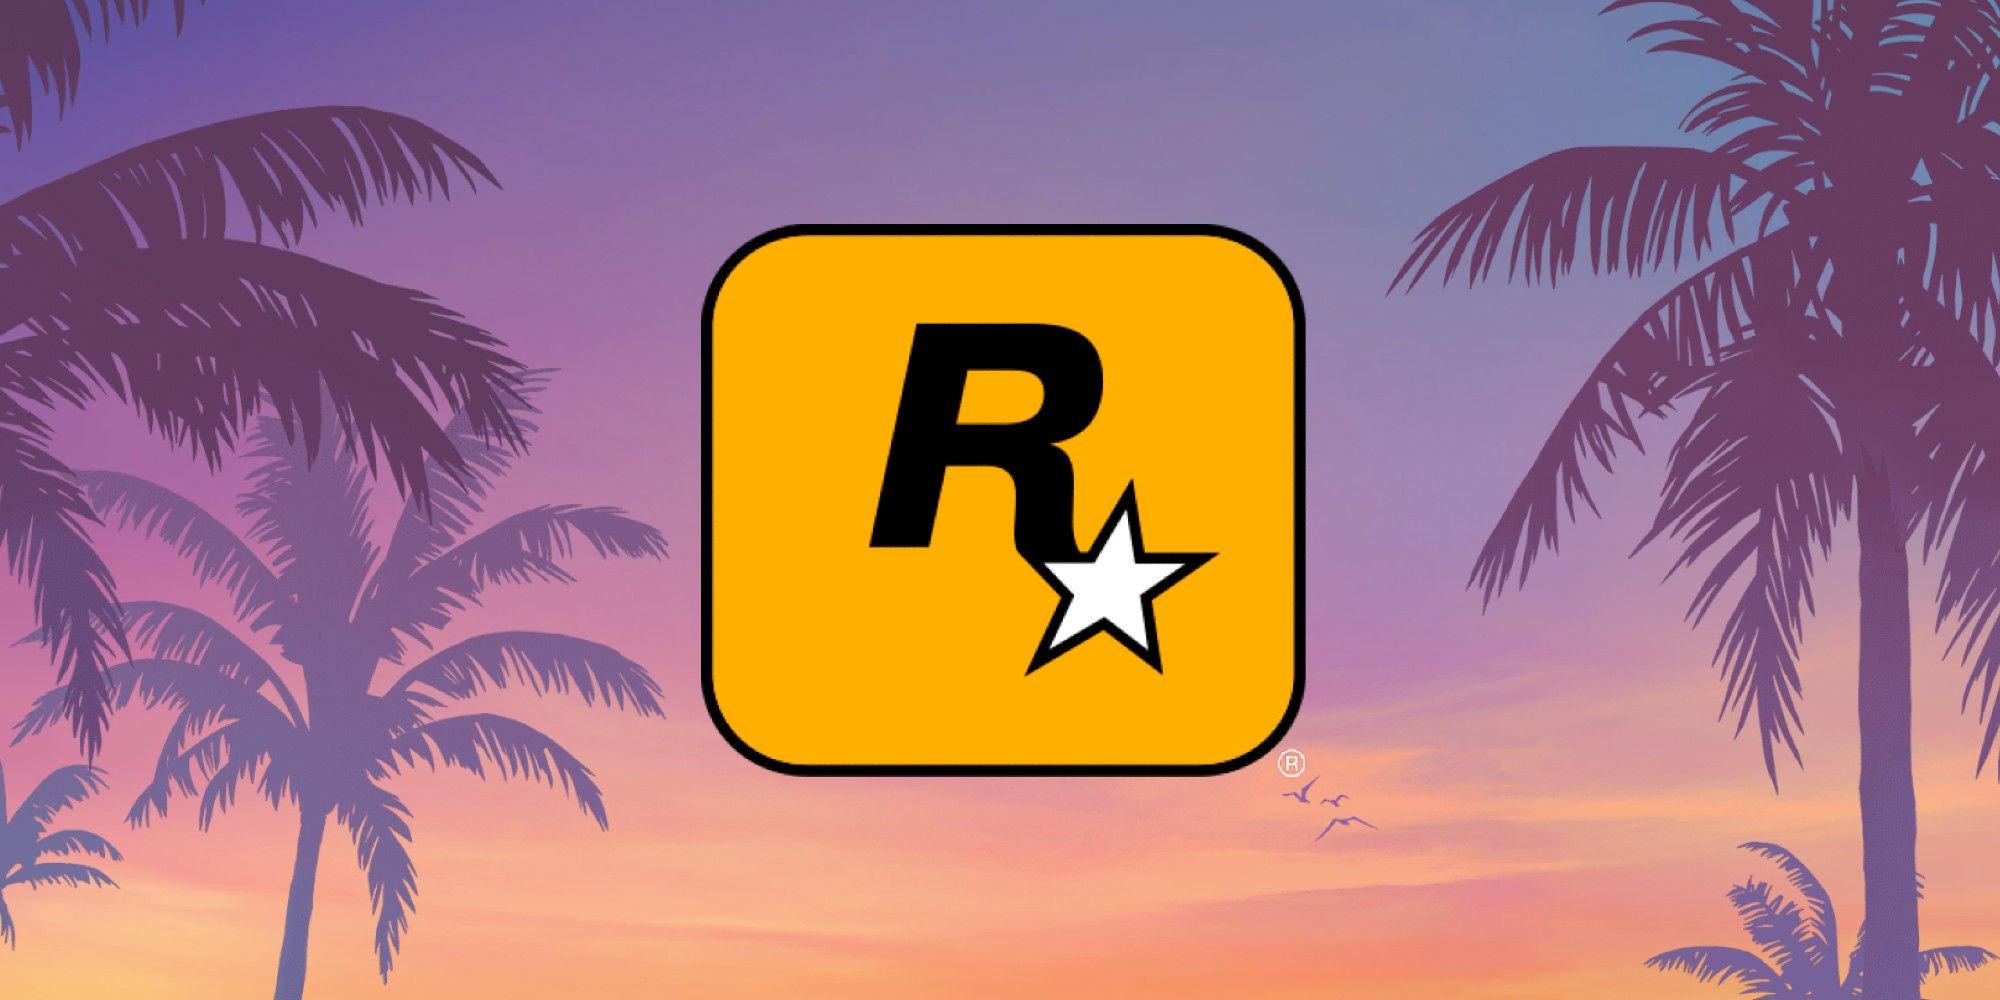 The Rockstar Games logo on a Vice City background